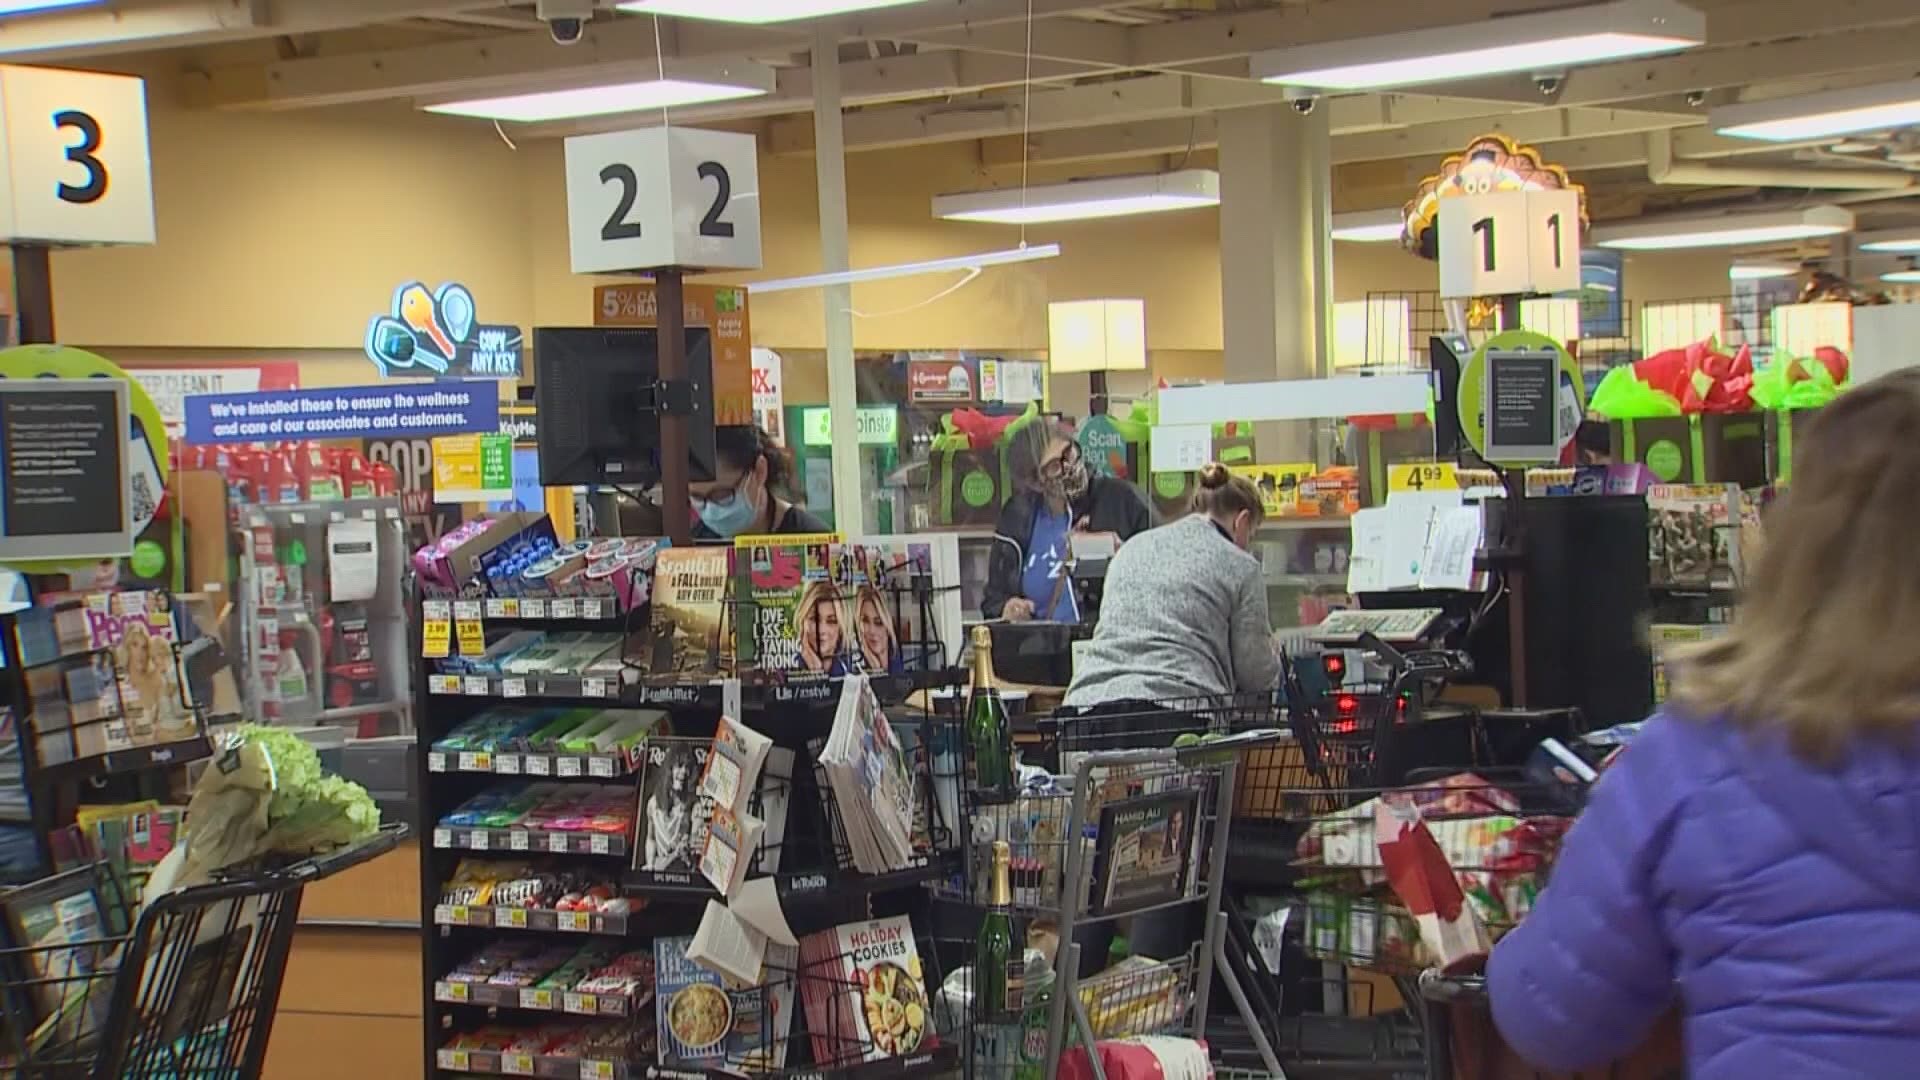 The Pierce County Council approved hazard pay for grocery workers. If the ordinance is signed off by the county executive, workers will receive an extra $4 an hour.